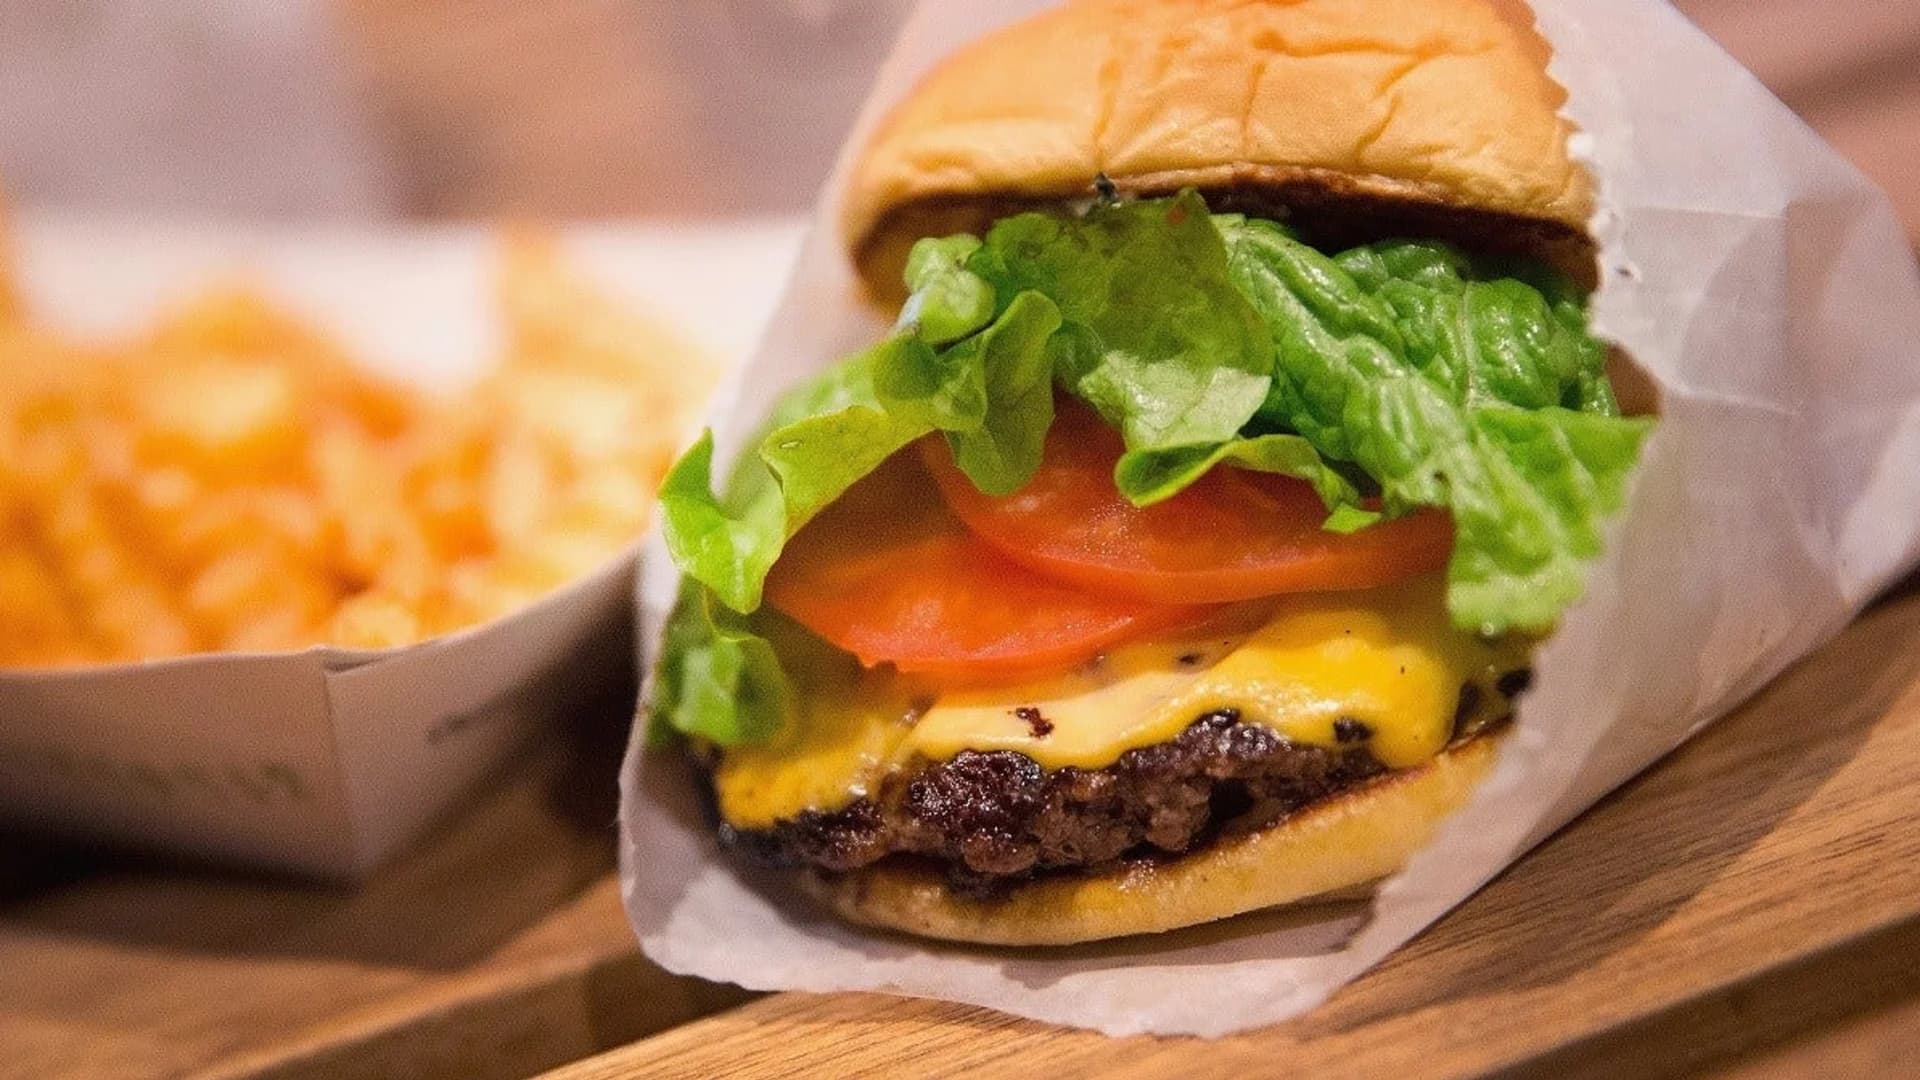 Get your hands on juicy deals for National Cheeseburger Day